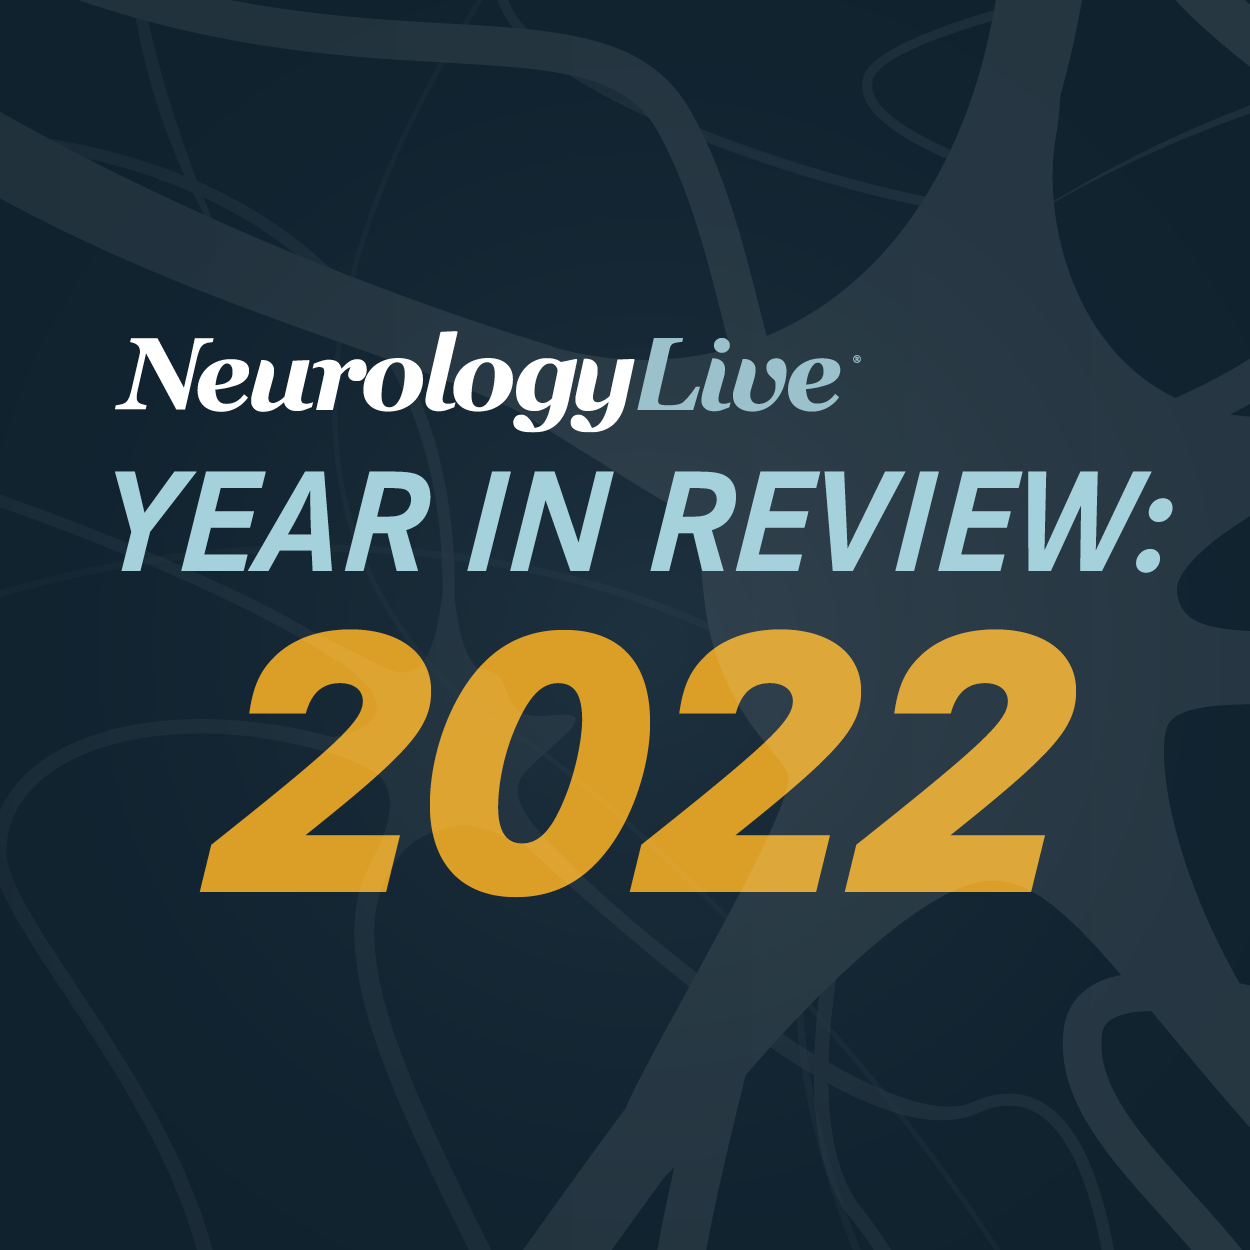 NeurologyLive® Year in Review 2022: Top Stories in Epilepsy